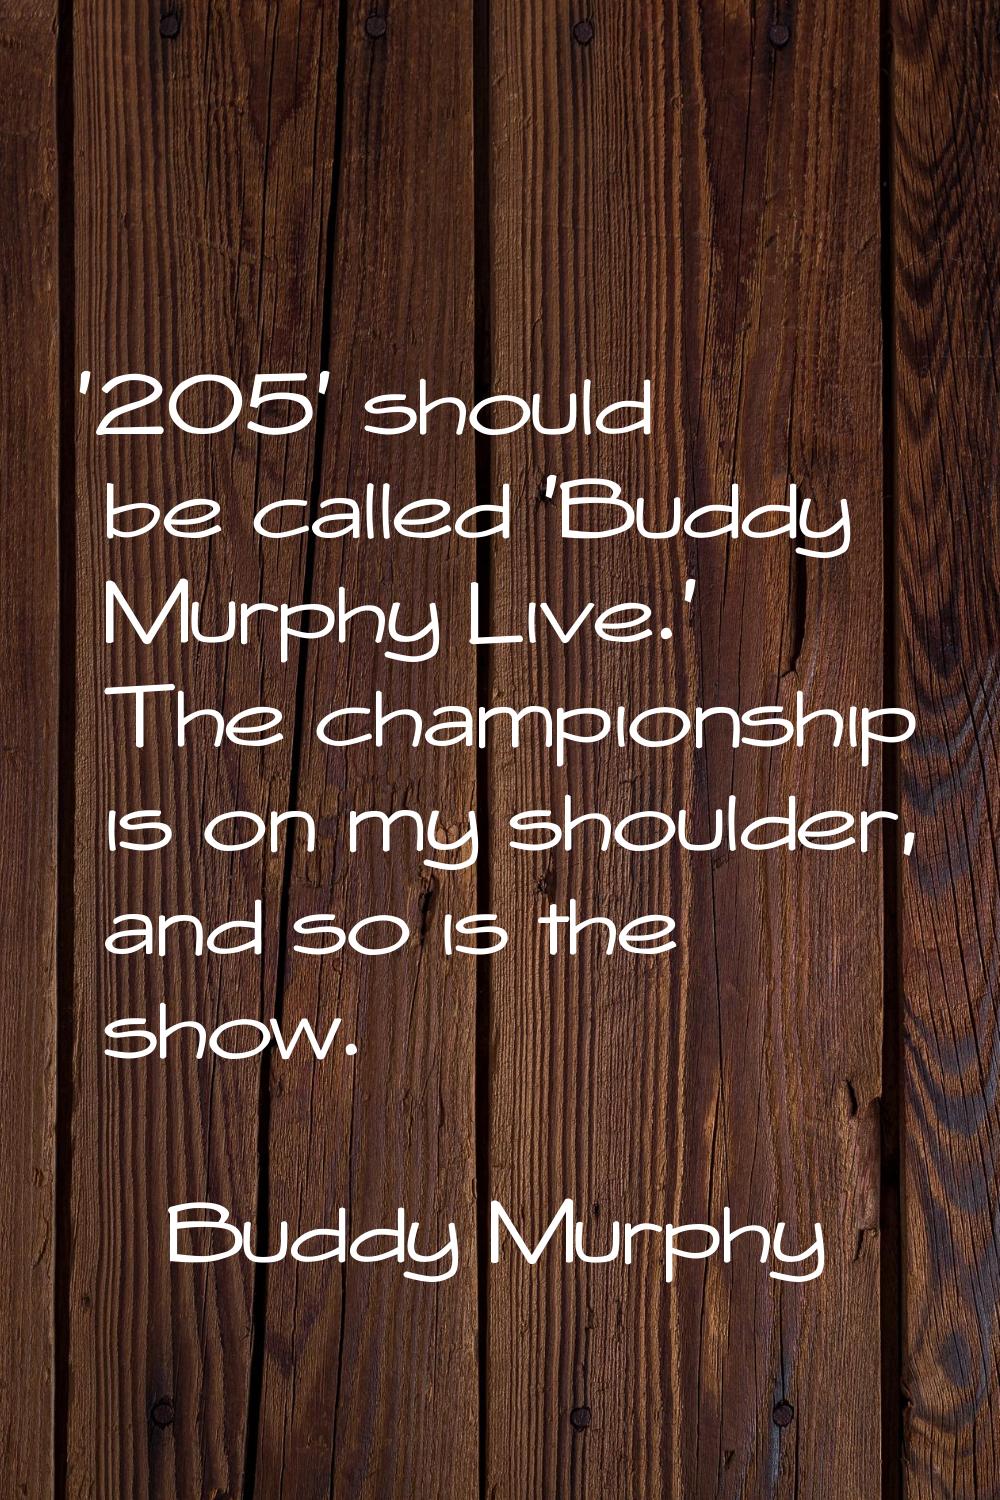 '205' should be called 'Buddy Murphy Live.' The championship is on my shoulder, and so is the show.